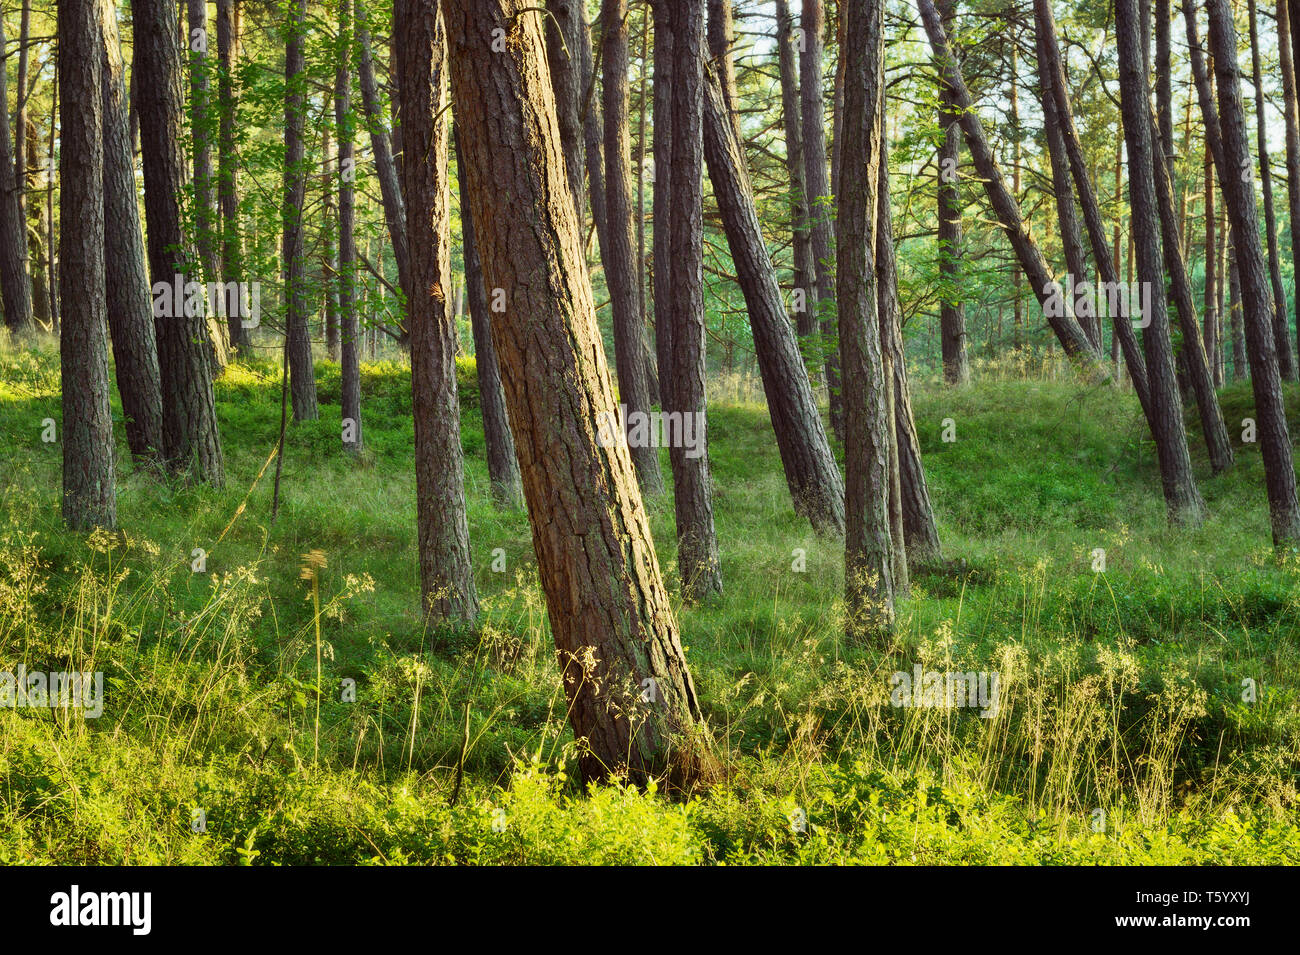 Summer pinewood. Scots or Scotch pine Pinus sylvestris trees in evergreen coniferous forest. Pomerania, Poland. Stock Photo